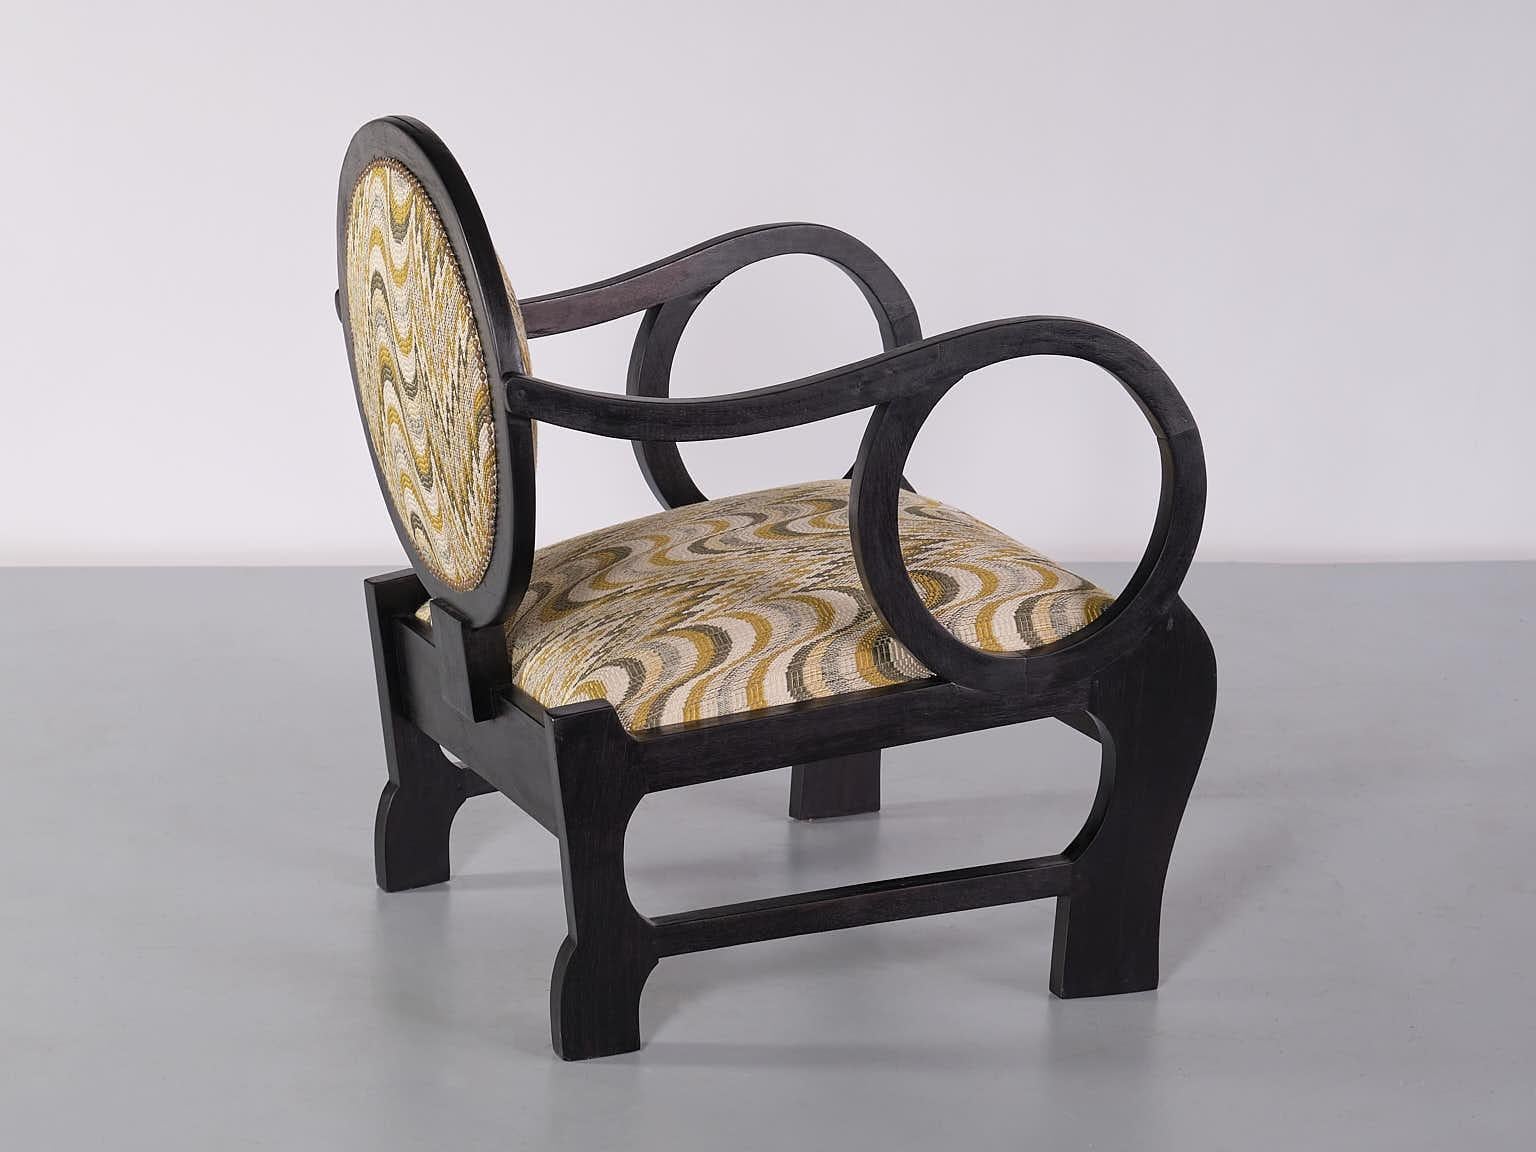 Pair of Lajos Kozma Attributed Armchairs in Oak and Dedar Jacquard, Late 1940s For Sale 3